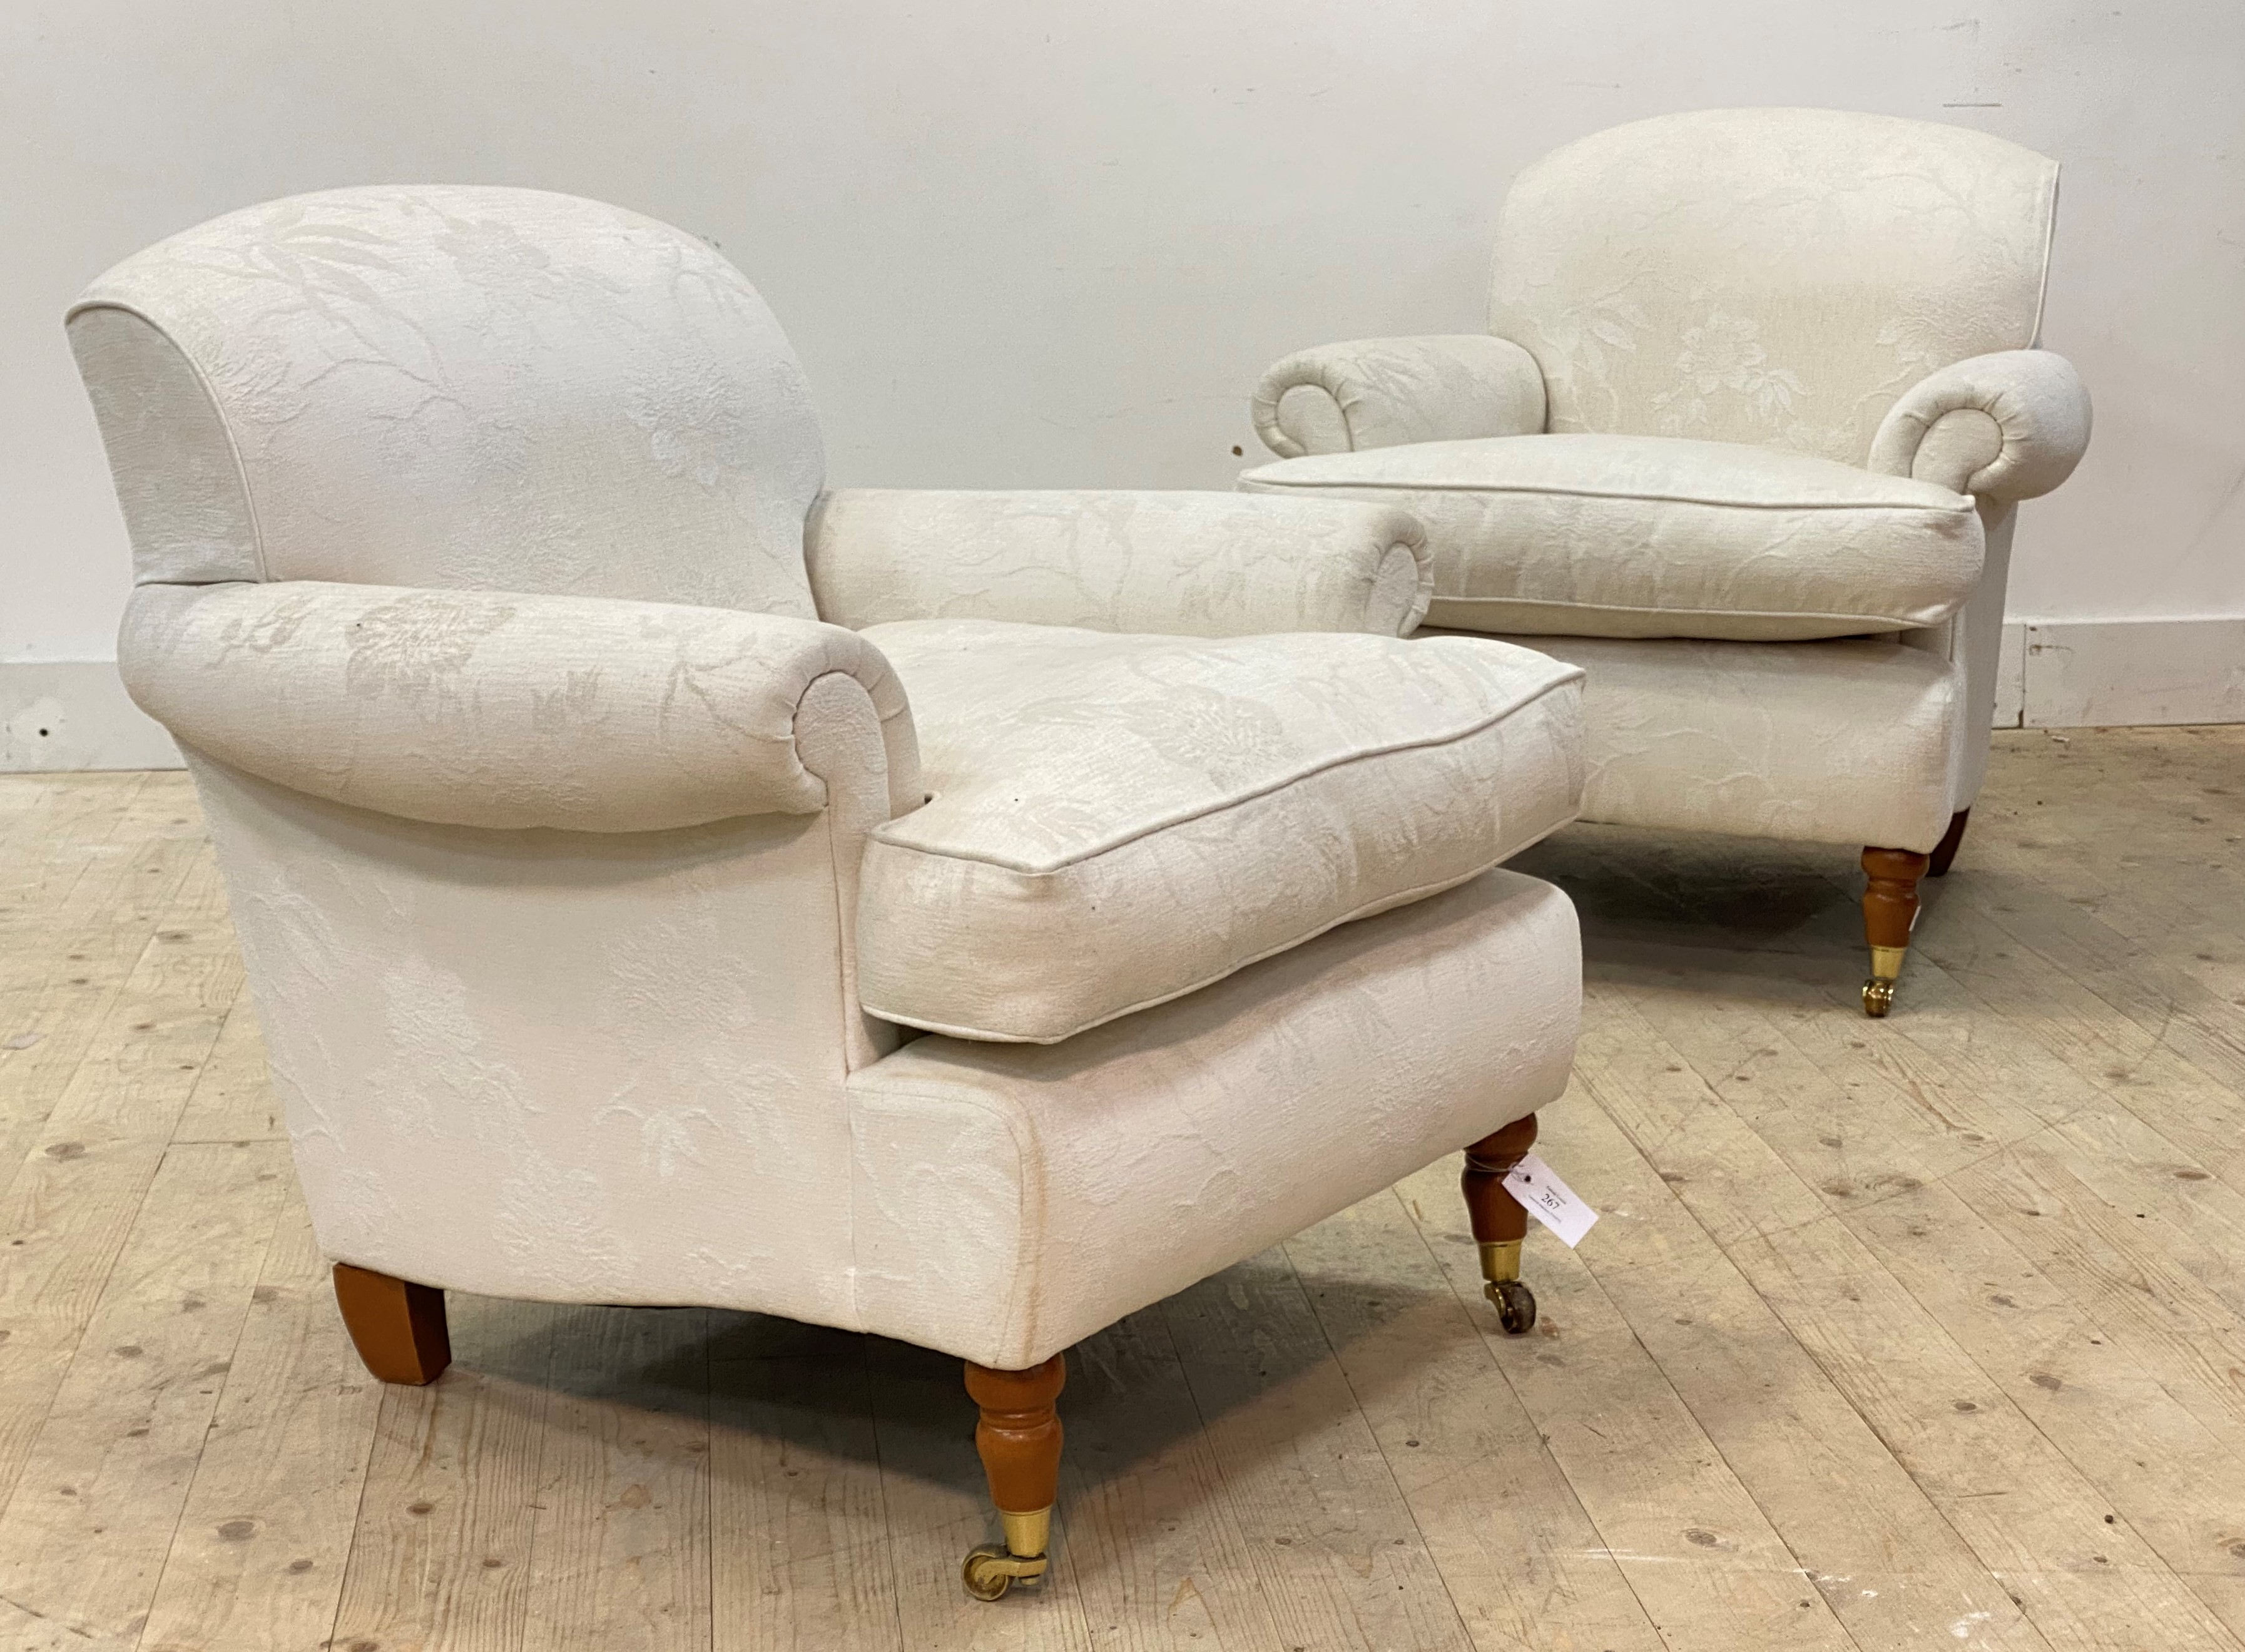 A pair of Victorian style easy chairs, upholstered in floral ivory damask fabric, raised on turned